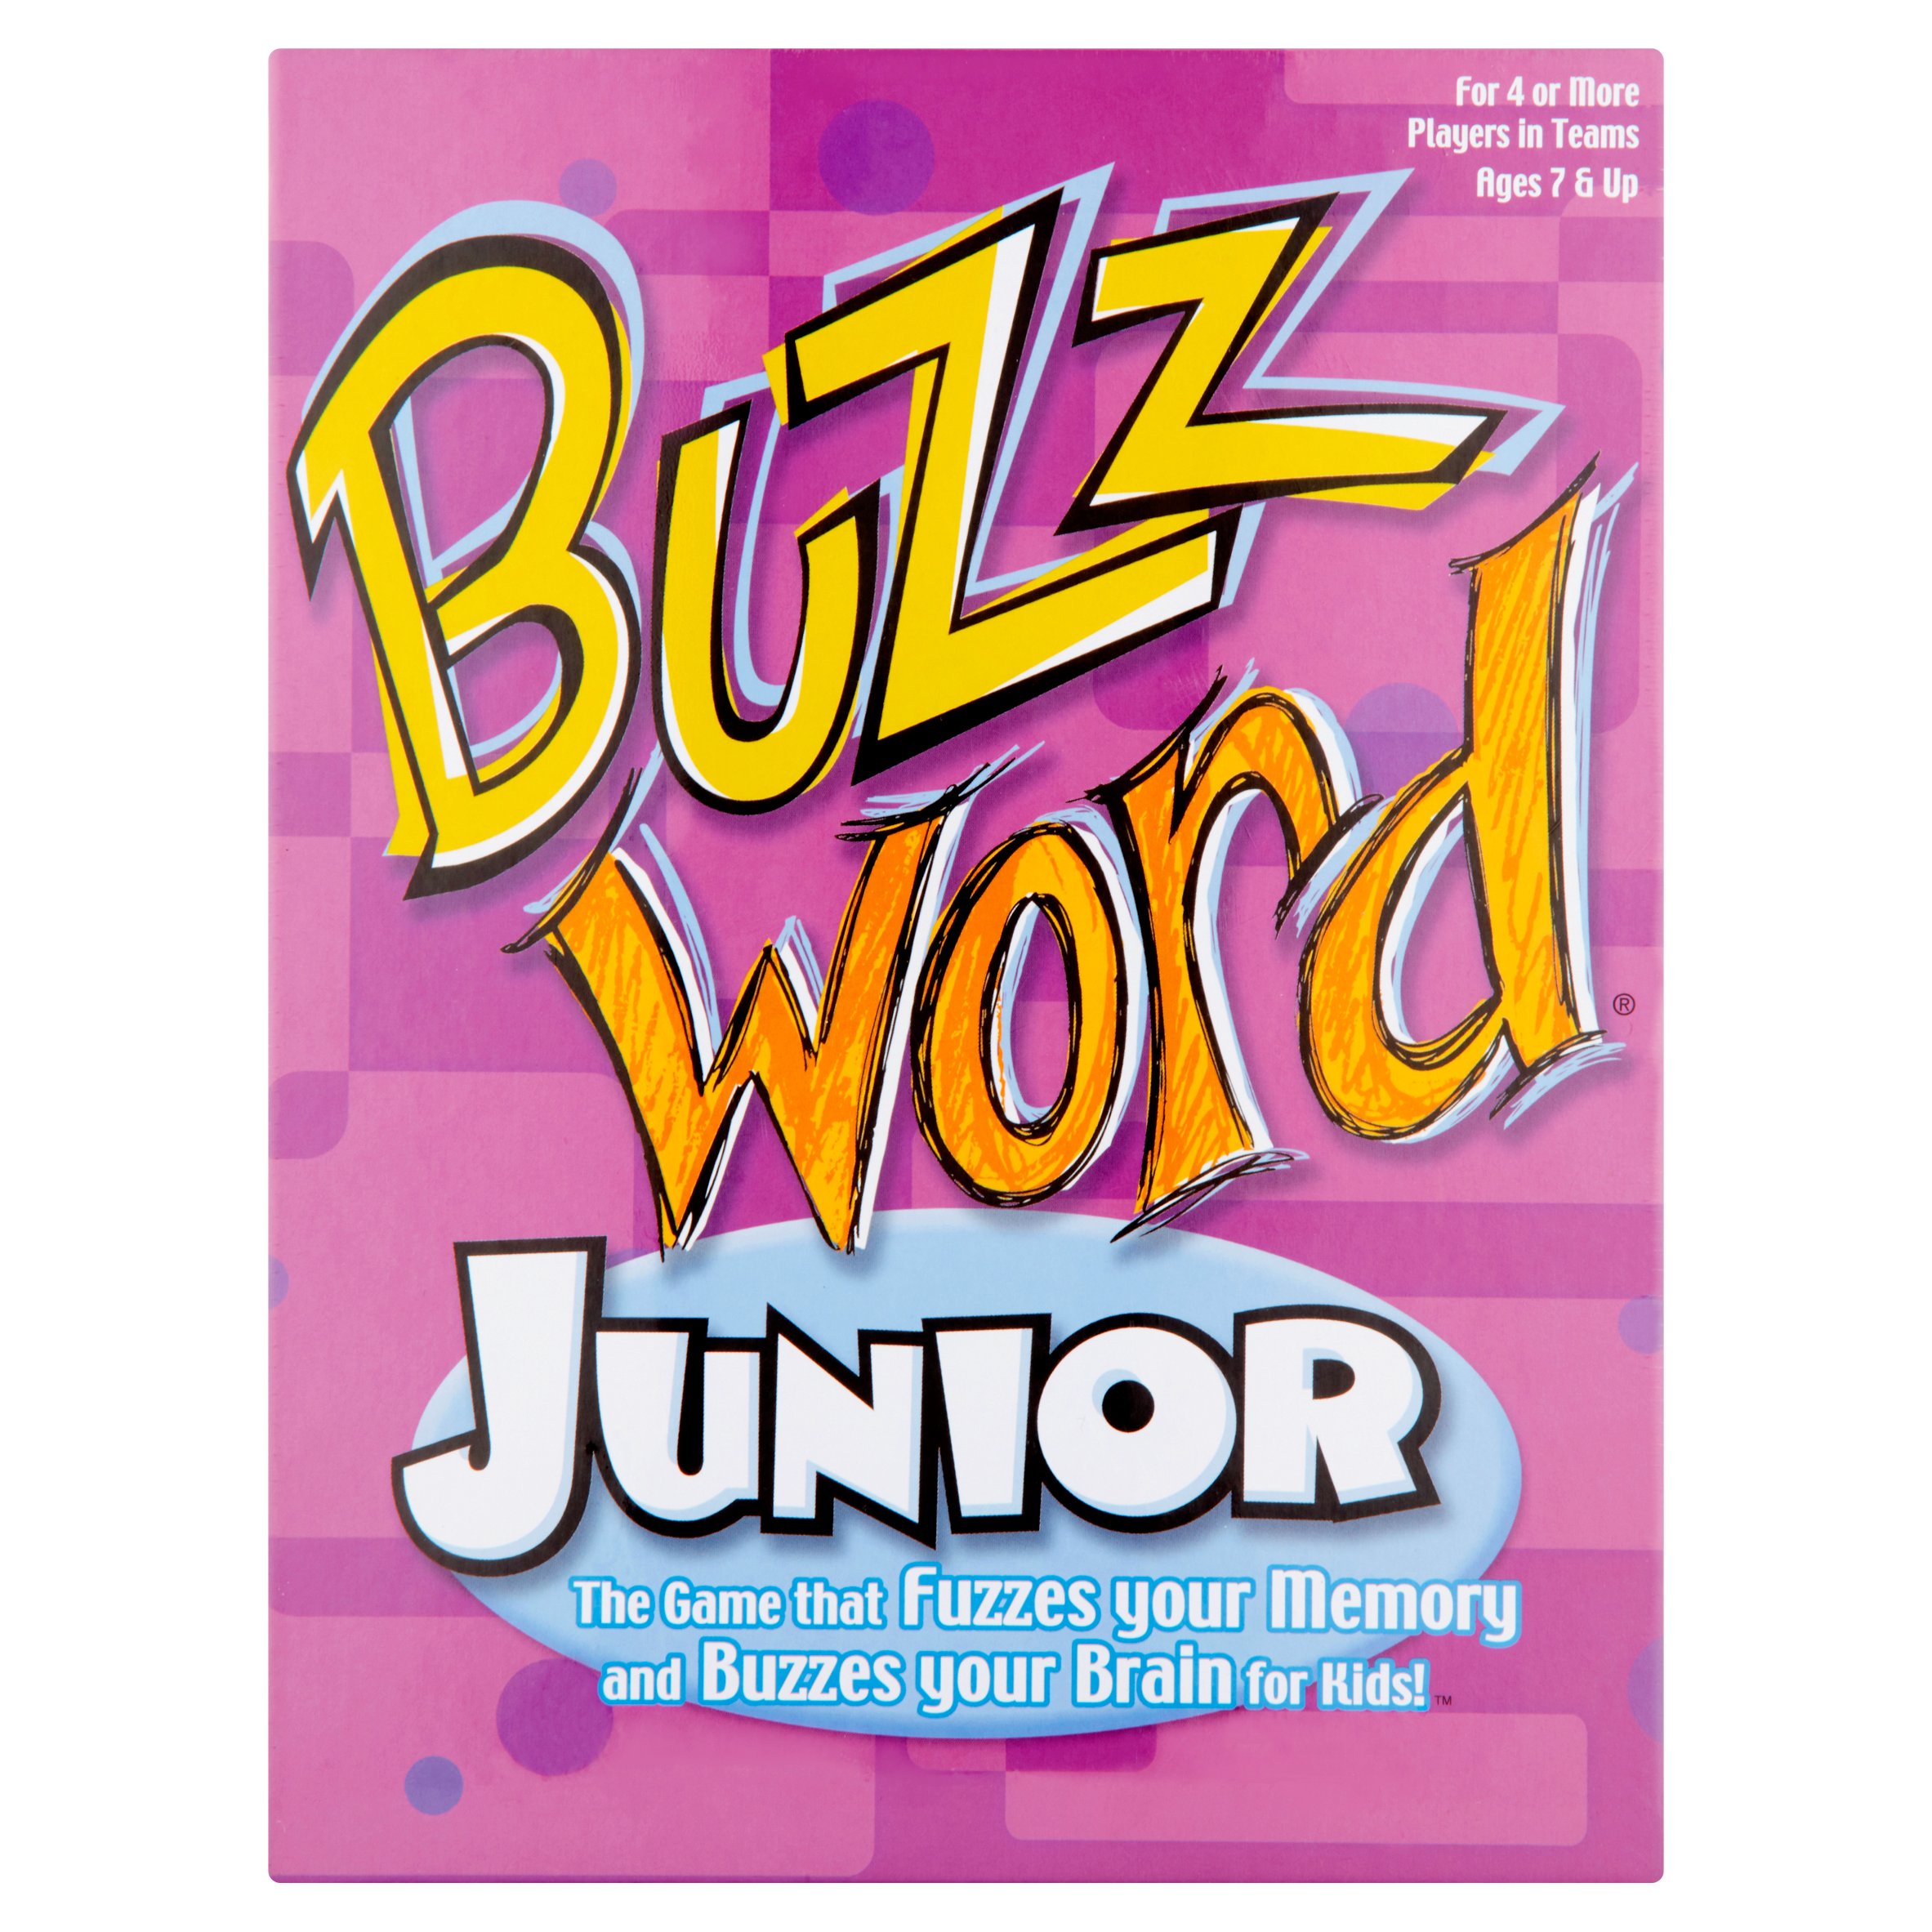 Patch Buzz Word Junior Game Ages 7 & up - image 1 of 5